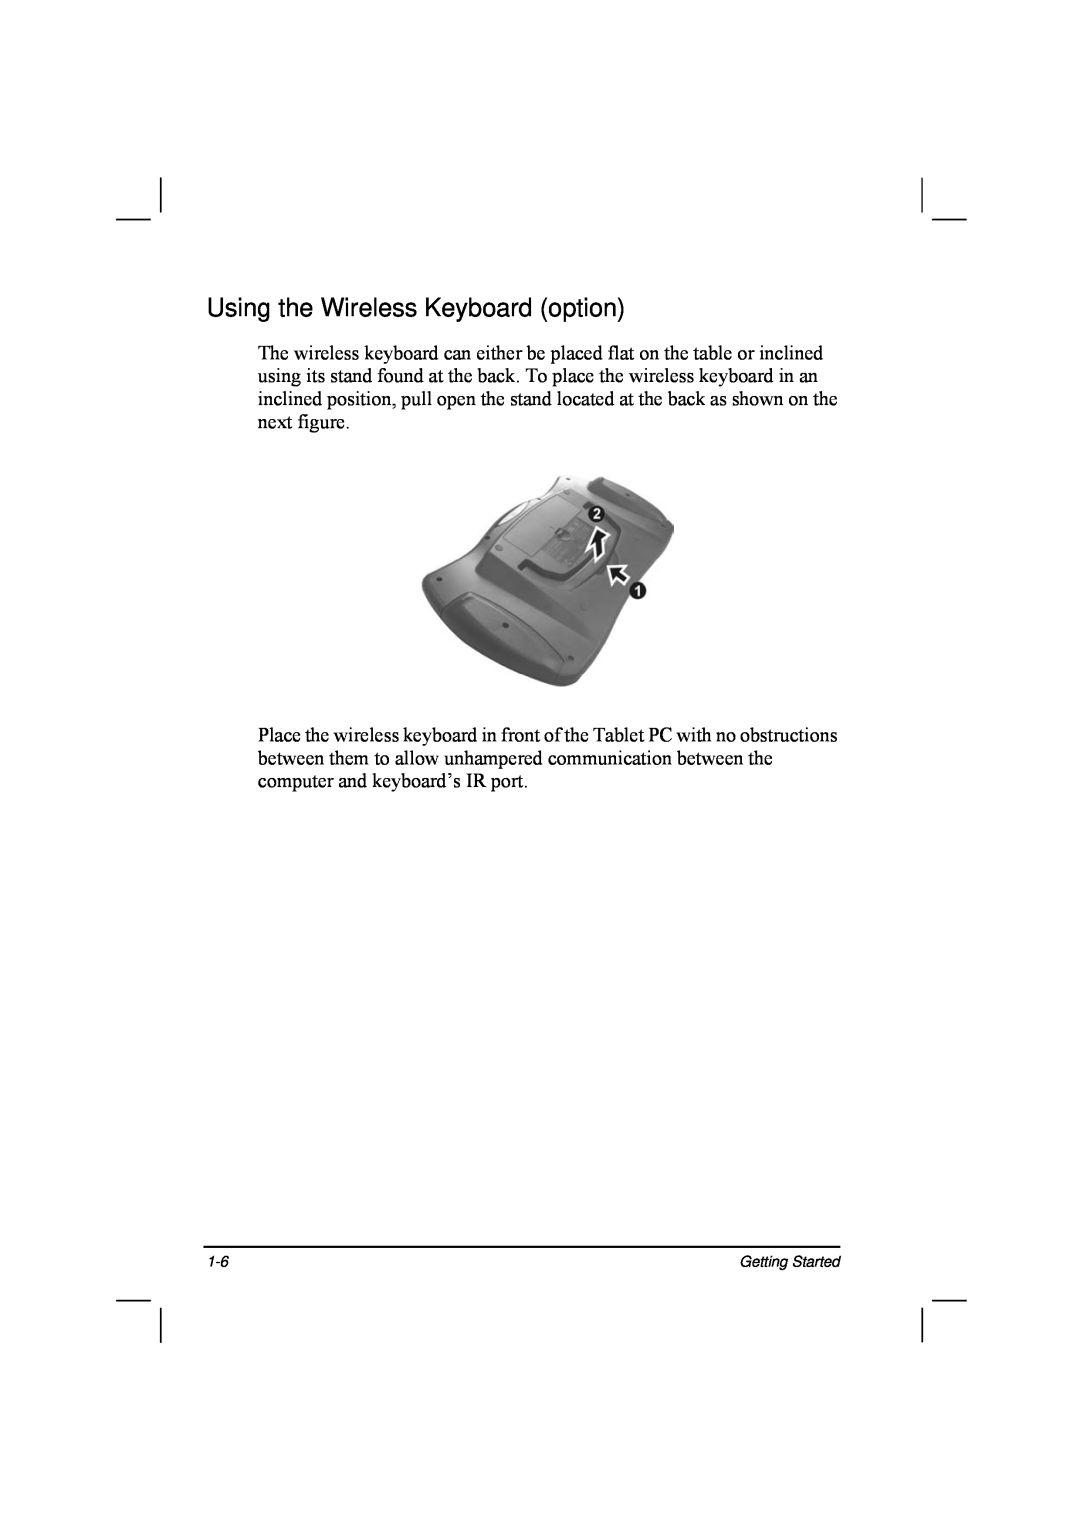 TAG 20 Series manual Using the Wireless Keyboard option 